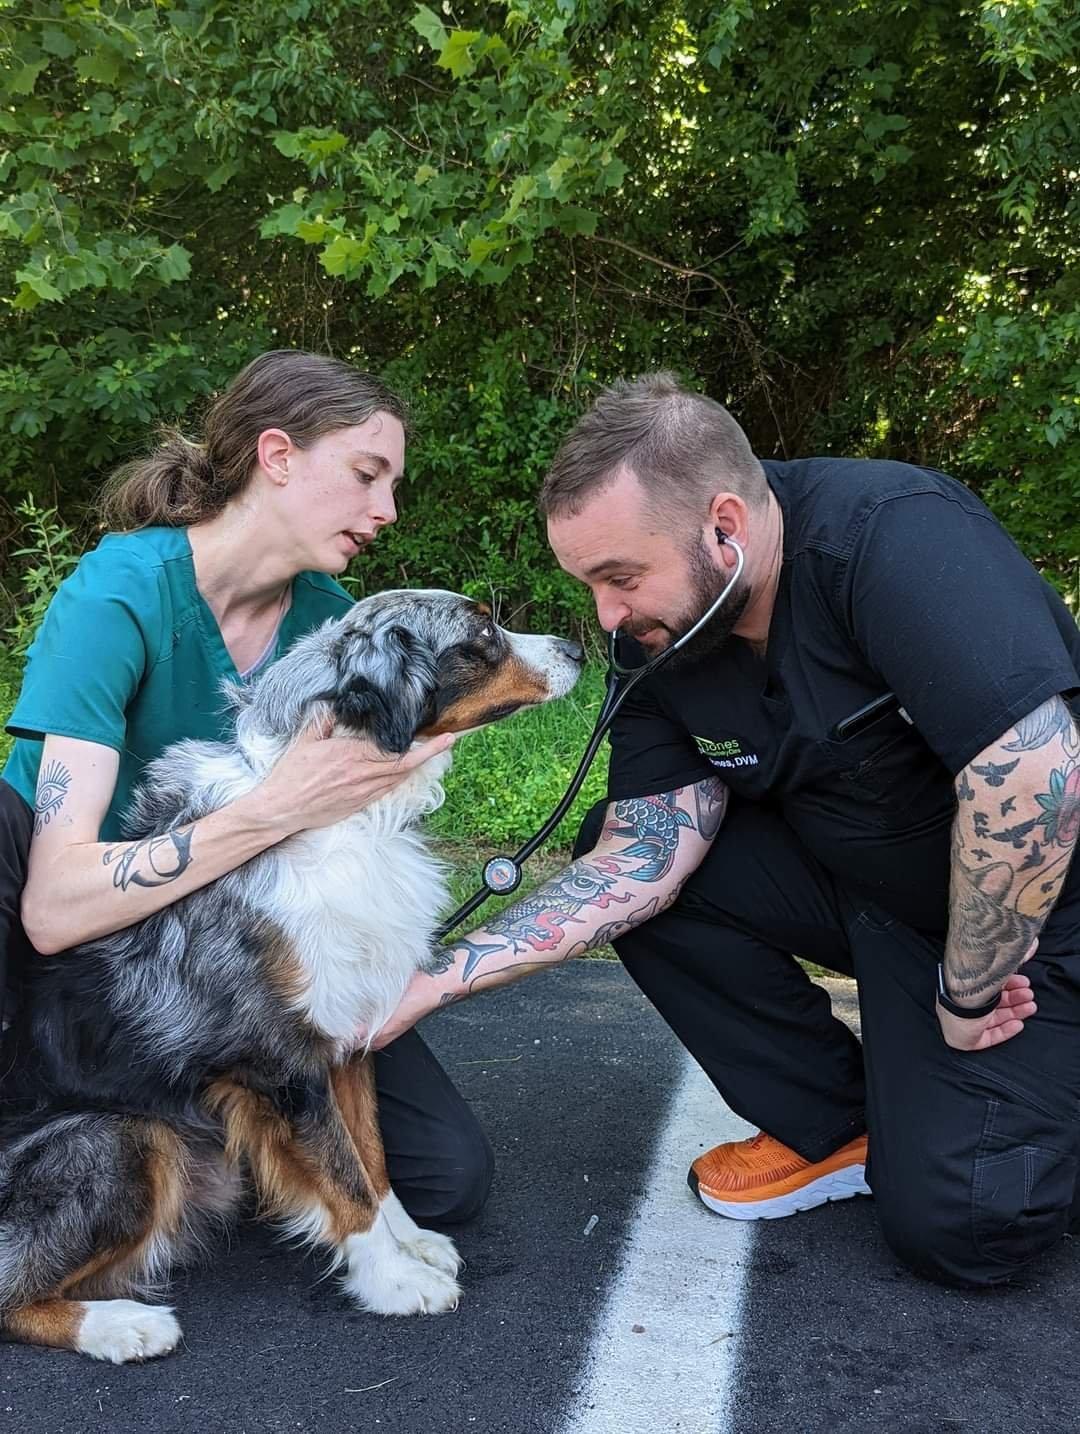 Salem's Light veterinarians provide quality care for our four-legged friends using ToolBank equipment to host successful pop-up clinics around Richmond. 